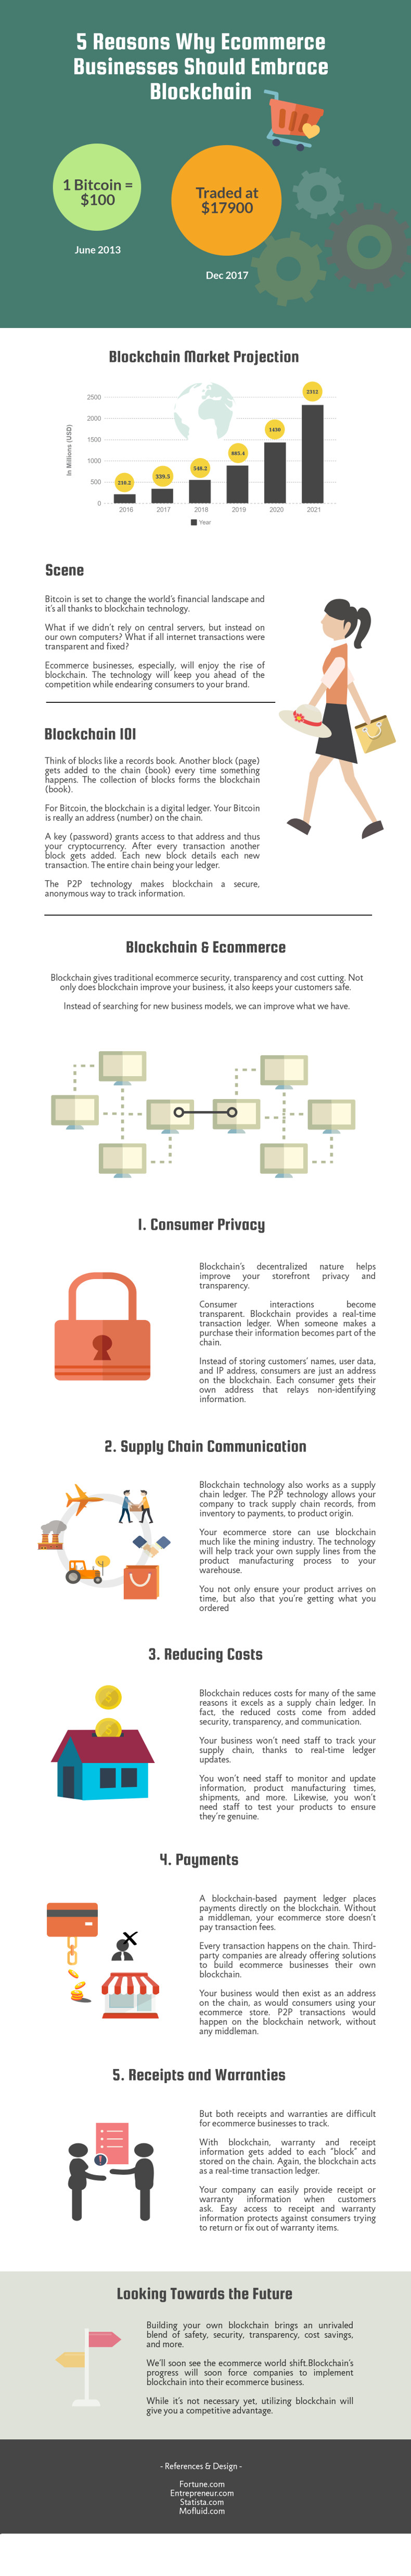 Five Reasons Blockchain for E-Commerce Businesses [Infographic]